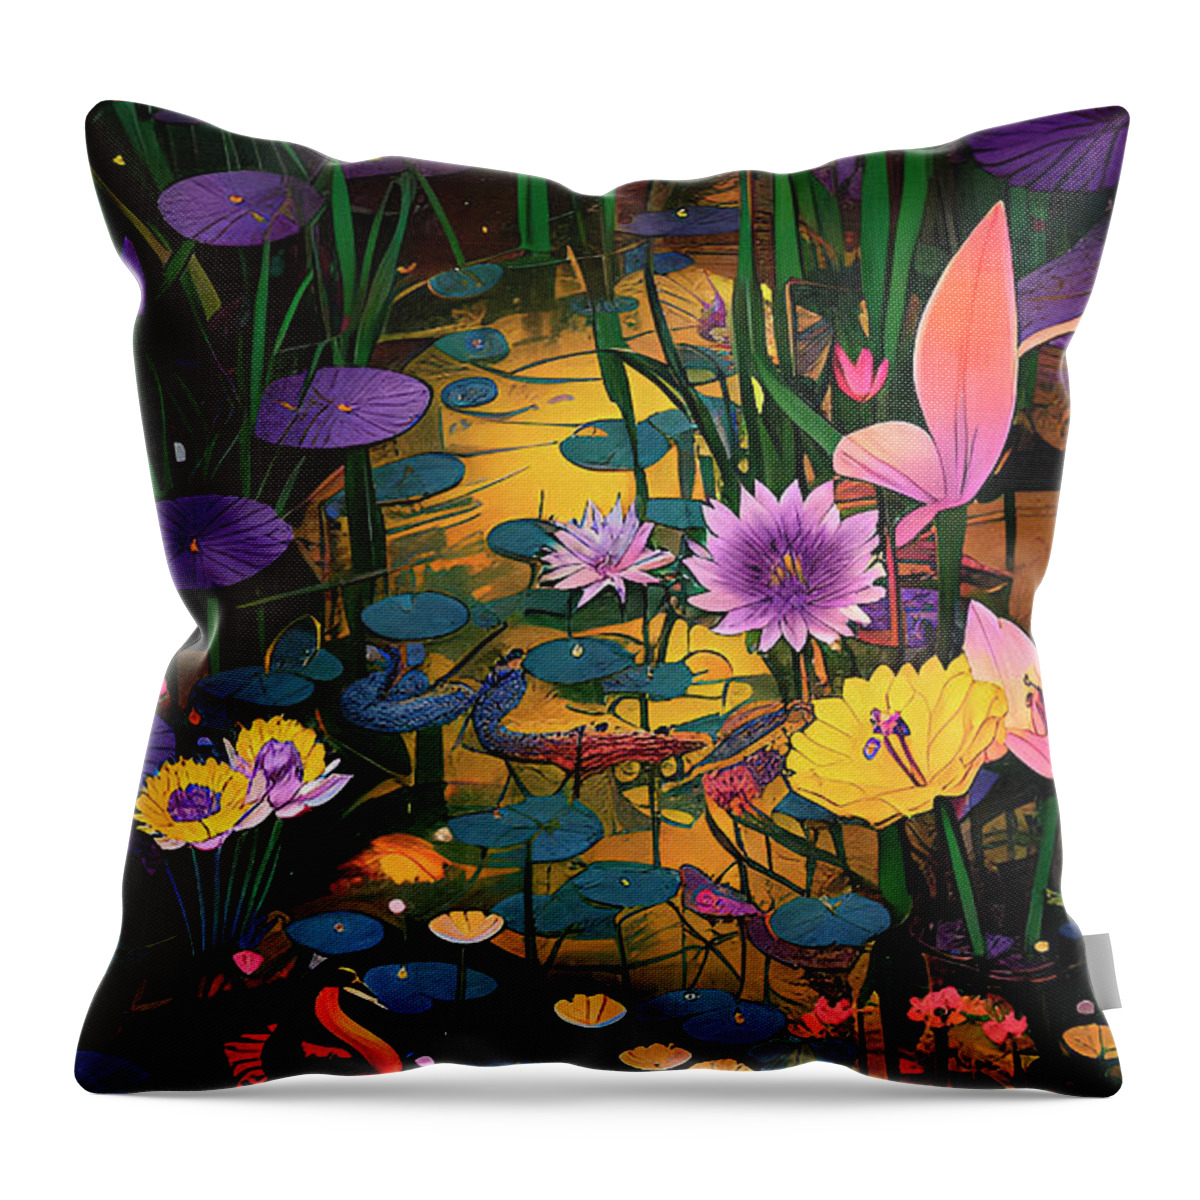 Sunsets Throw Pillow featuring the digital art Wetland Magic Sunset Reflections by Ginette Callaway